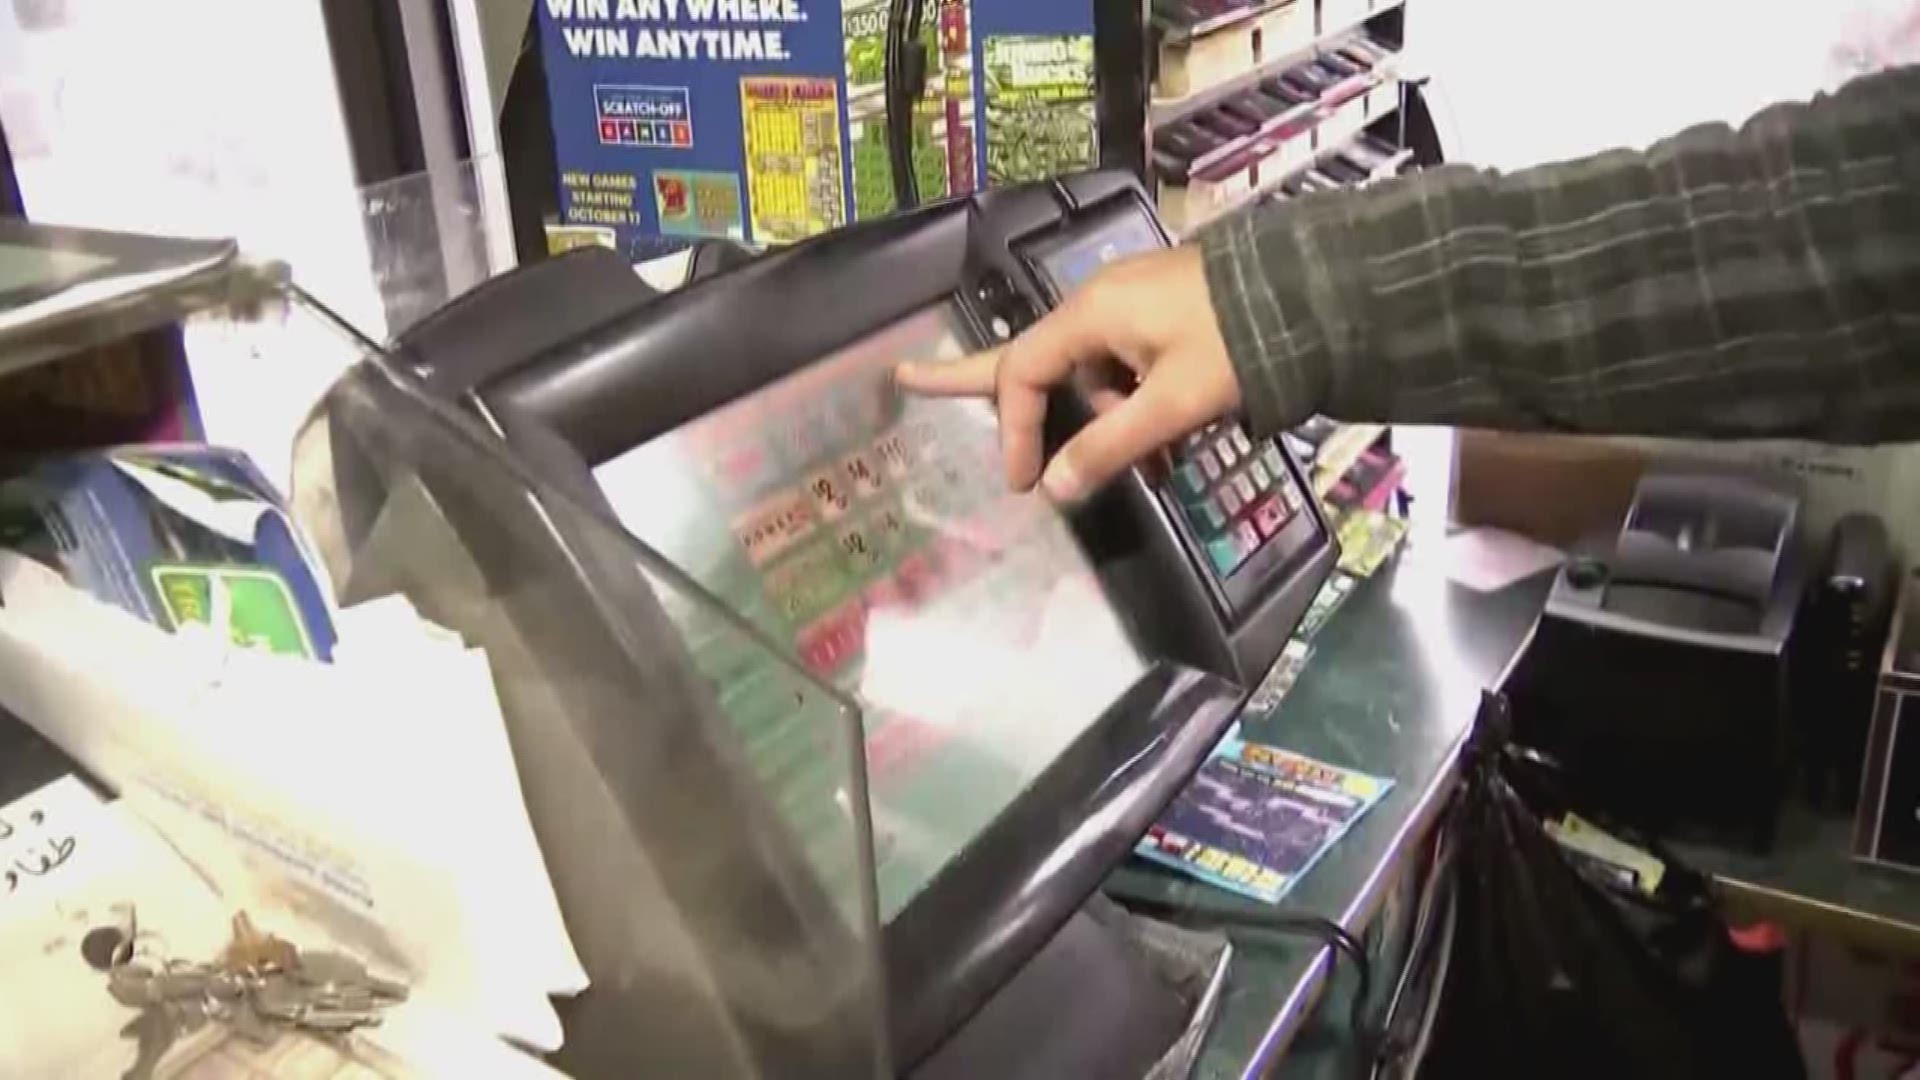 As of today - the Mega Millions jackpot sits at 548-million dollars, the third highest in the game's history.